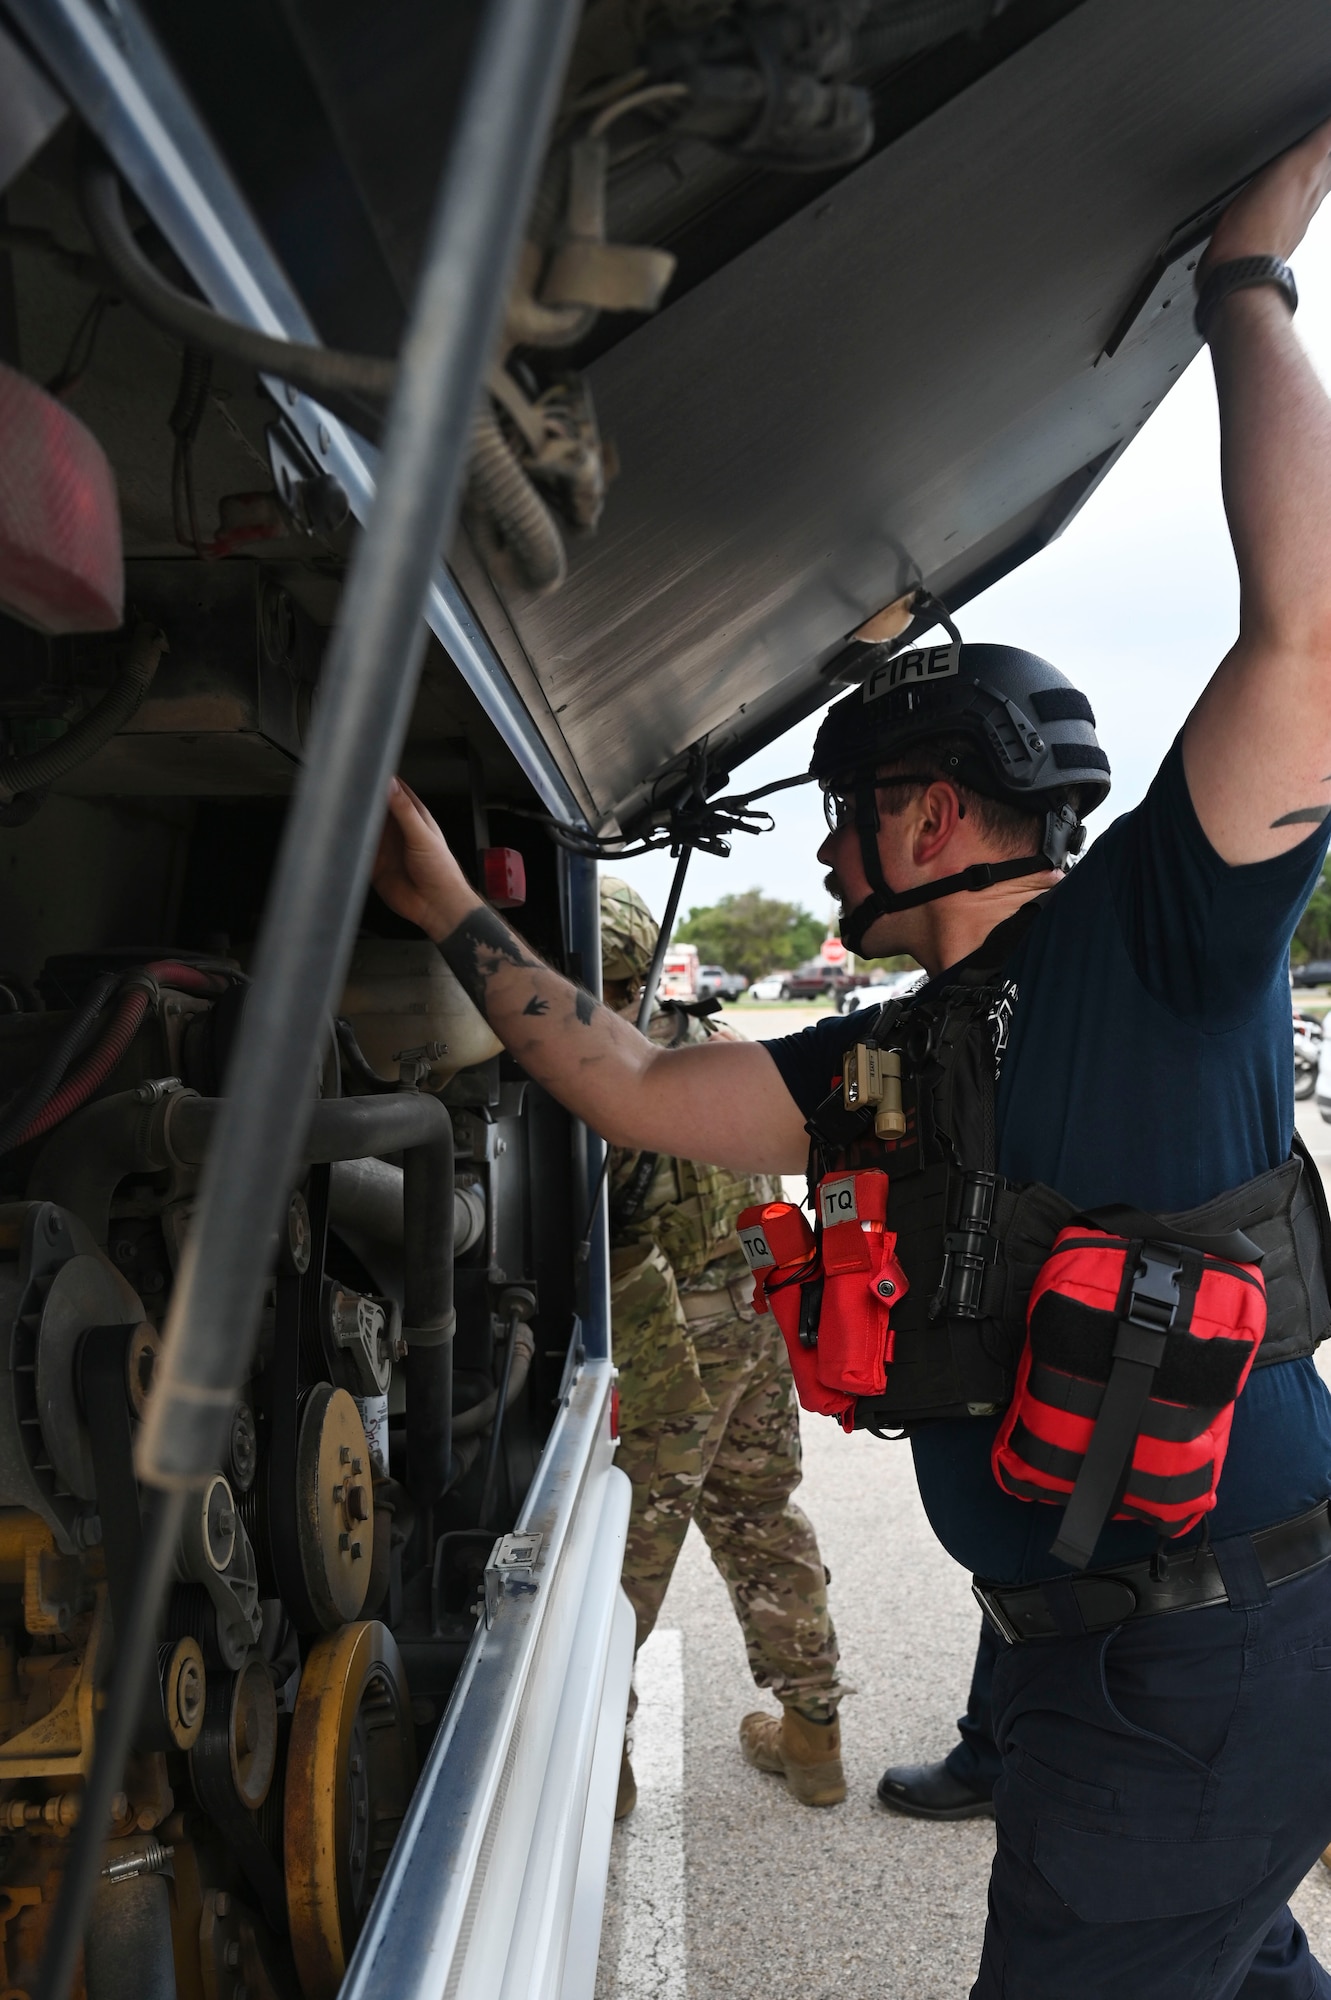 Galvin Maltais, 17th Civil Engineer Squadron firefighter, participates in an active shooter exercise during the Rescue Task Force course of the Threat Suppression Inc. exercise, Goodfellow Air Force Base, Texas, Sep. 21, 2023. This exercise simulated what would be expected of responding officers and firefighters if there was an active shooter situation on a large vehicle carrying multiple civilians. Members of the 17th Security Forces Squadron, the 17th CES fire department, and local Tom Green County Sheriff's Office officers participated in a week of classroom and practical exercises to prepare them for real world scenarios. (U.S. Air Force photo by Airman 1st Class Madison Collier)